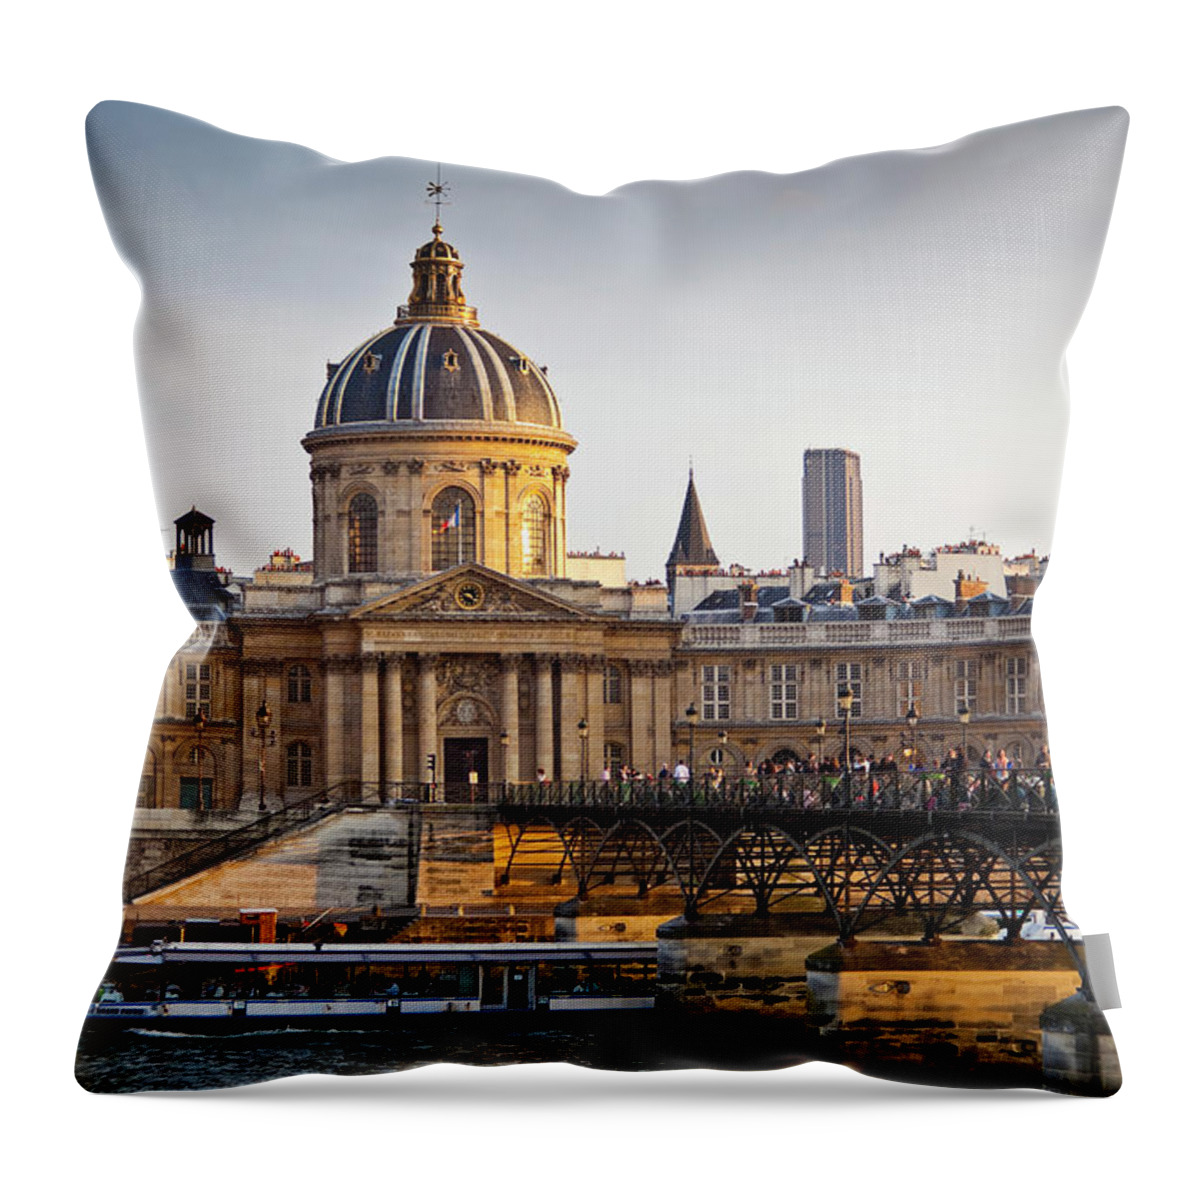 Arch Throw Pillow featuring the photograph French Institue And Pont Des Arts Over by Richard I'anson